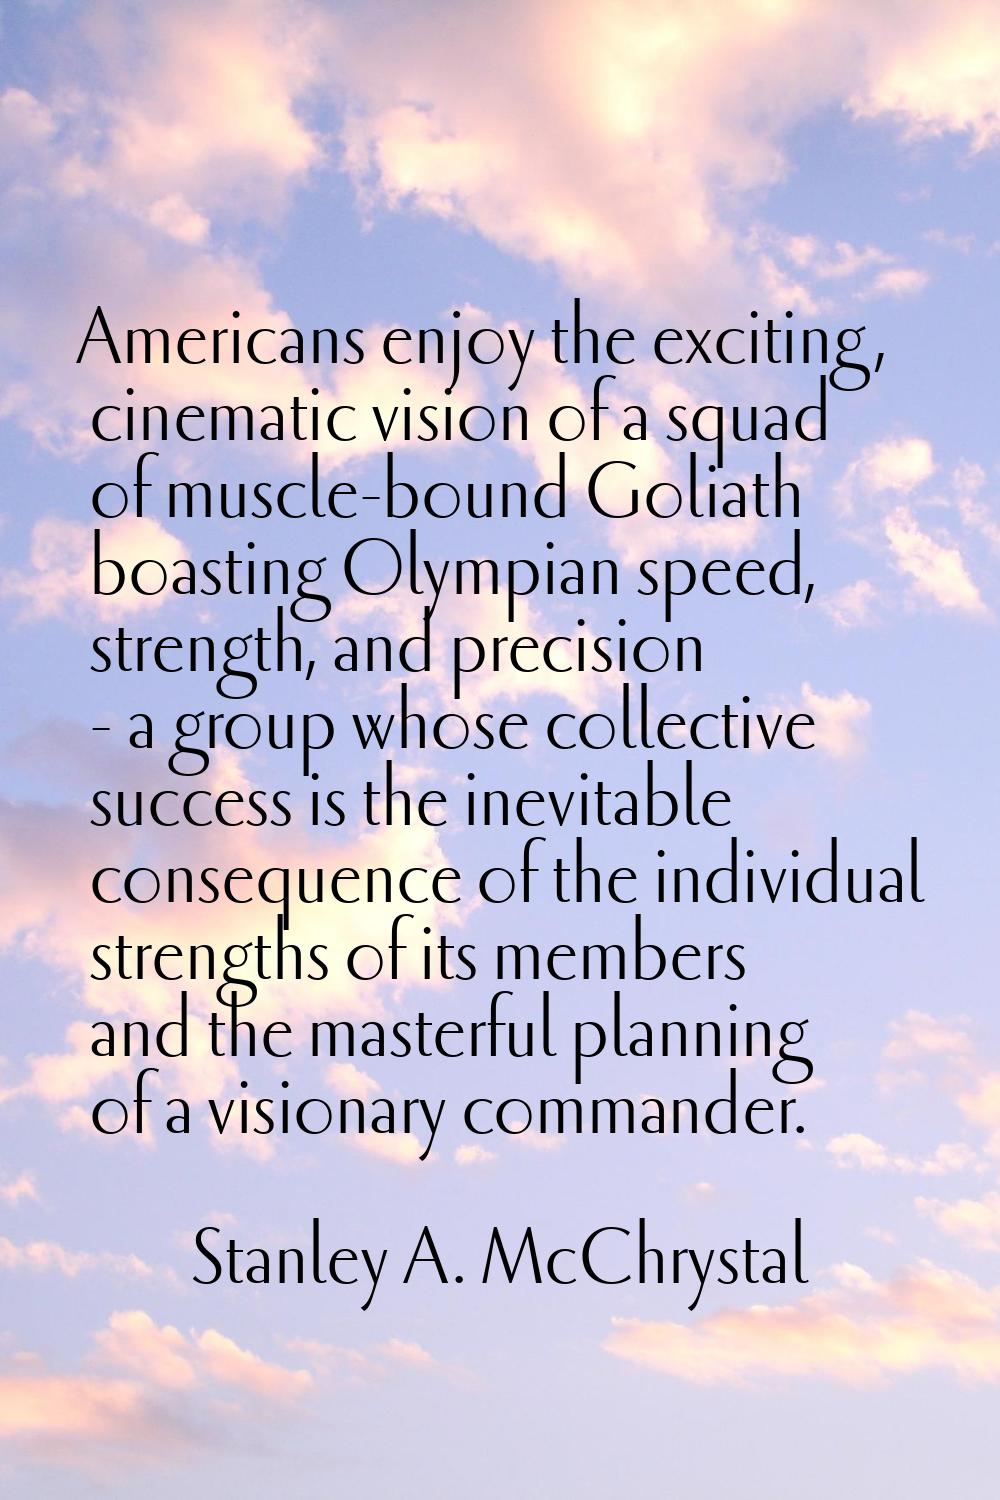 Americans enjoy the exciting, cinematic vision of a squad of muscle-bound Goliath boasting Olympian